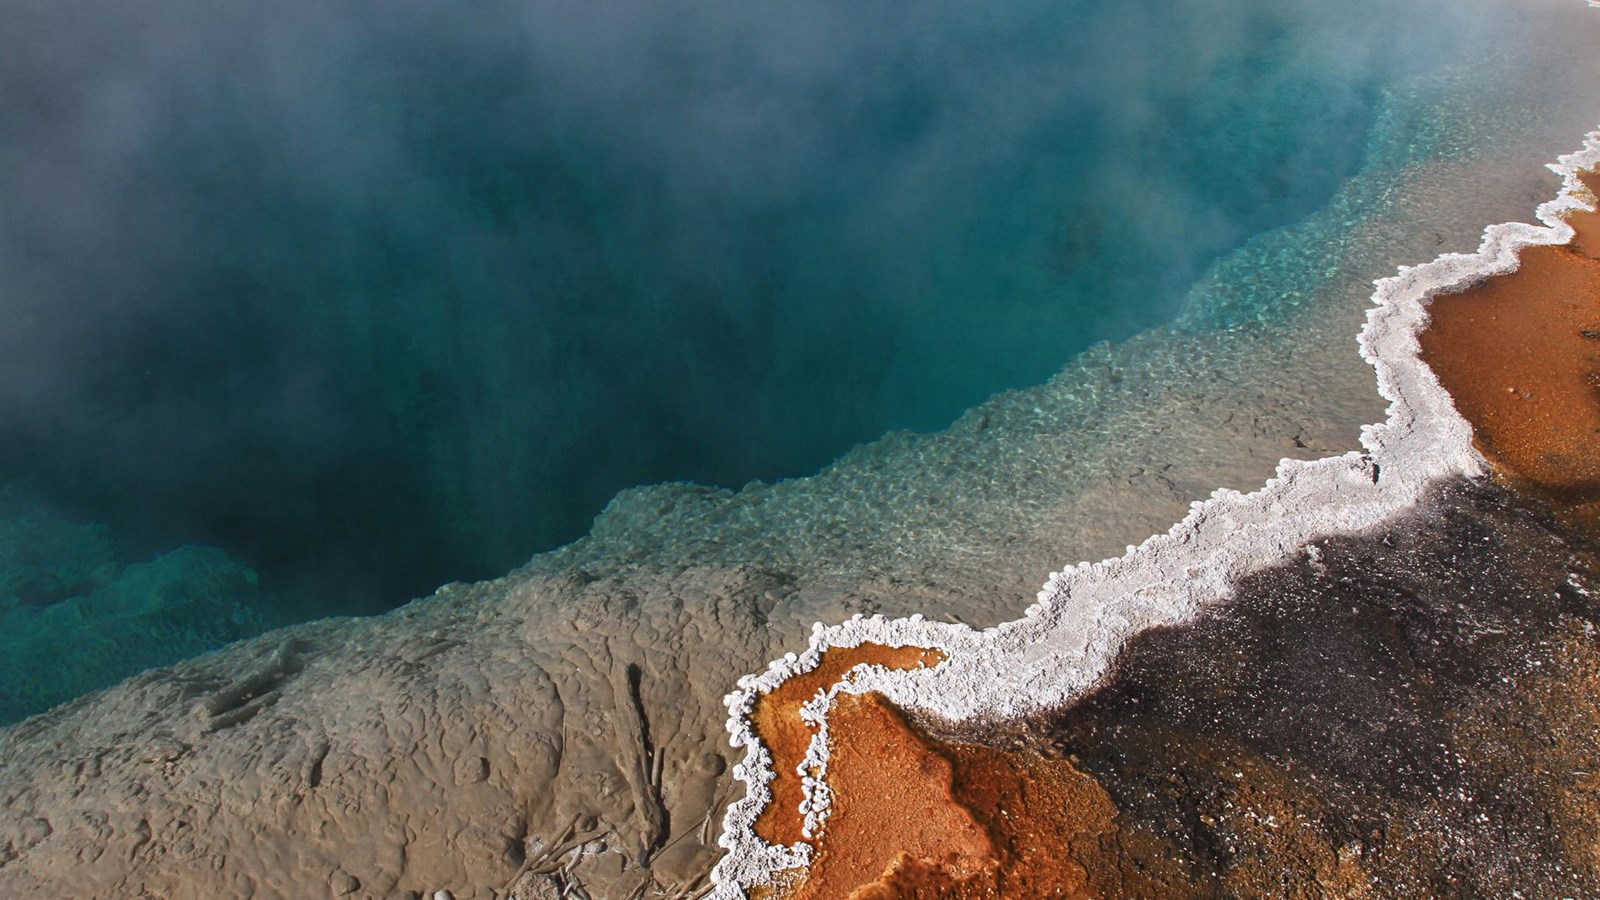 Steam rises off a turquoise blue hot spring with orange microbial mats along the edge.